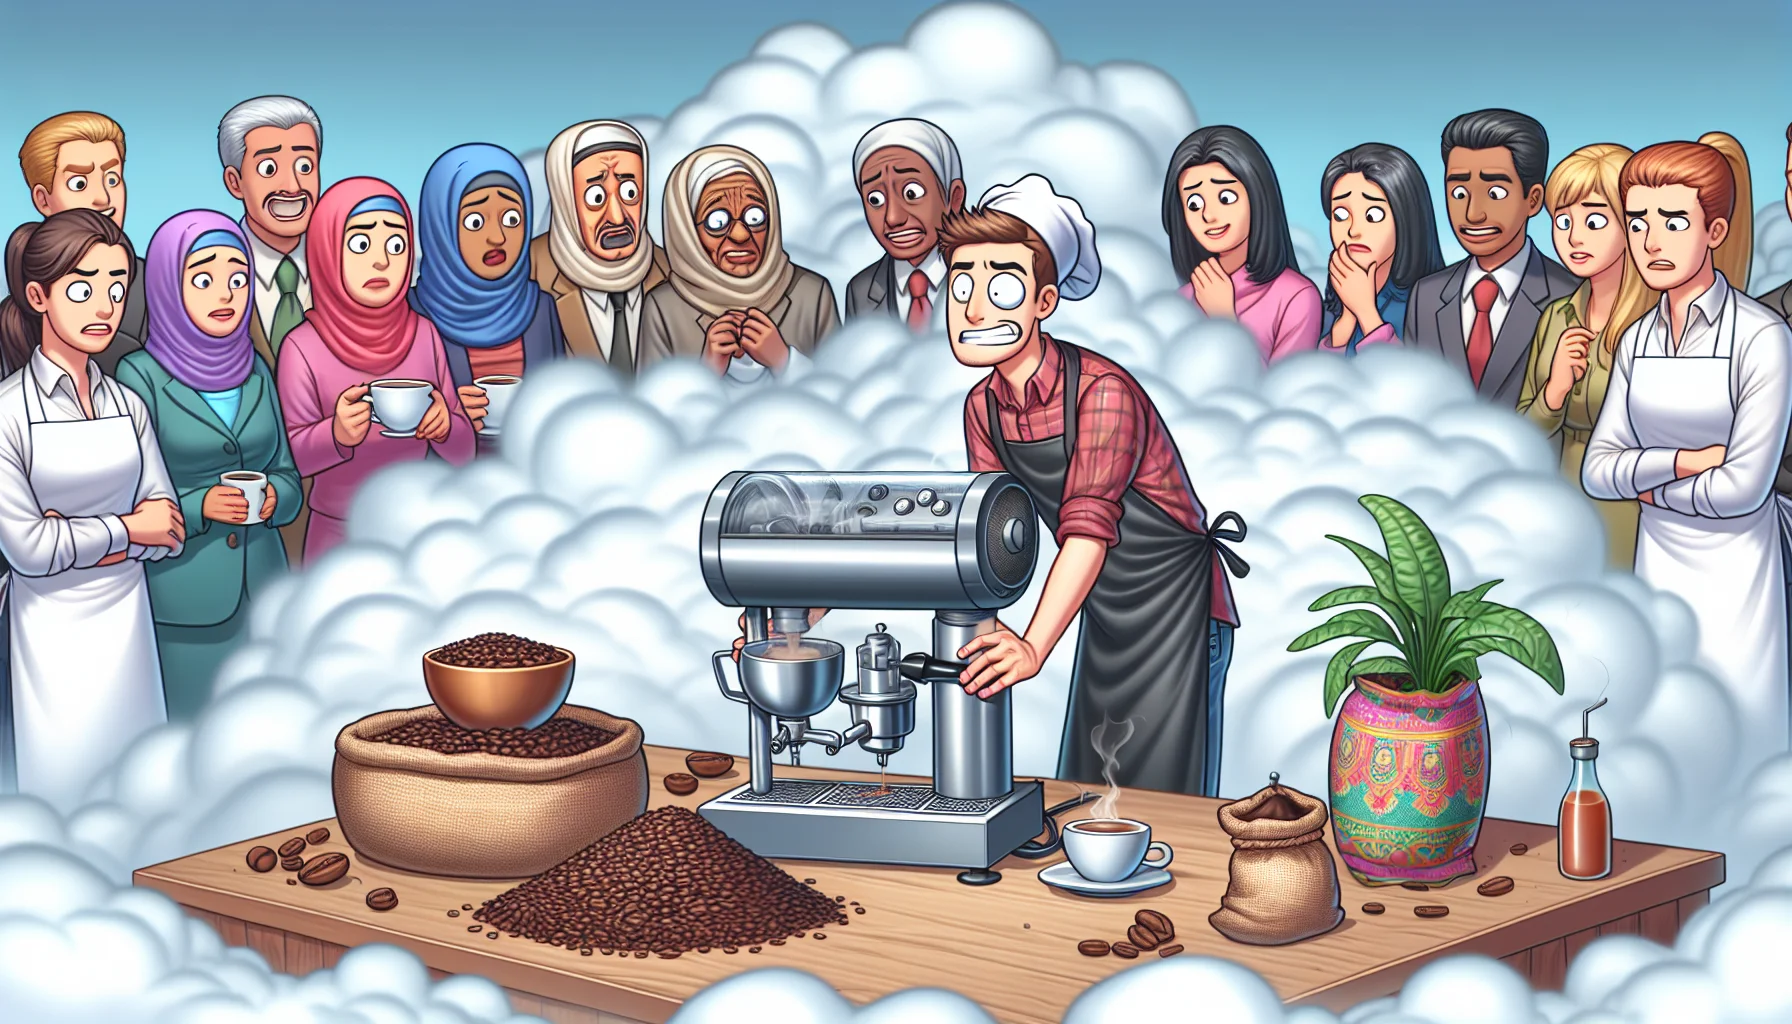 Create a humorous scene at a generic coffee and tea shop. It involves a novice barista, a Caucasian male in his early twenties, who is confusedly trying to operate a fancy brewing machine amidst a cloud of steam. Different exotic bags of coffee beans and tea leaves are scattered all around him. Customers, ranging from a Middle-Eastern elderly woman to a South Asian adolescent girl, are watching his brewing journey with amusing expressions on their faces.